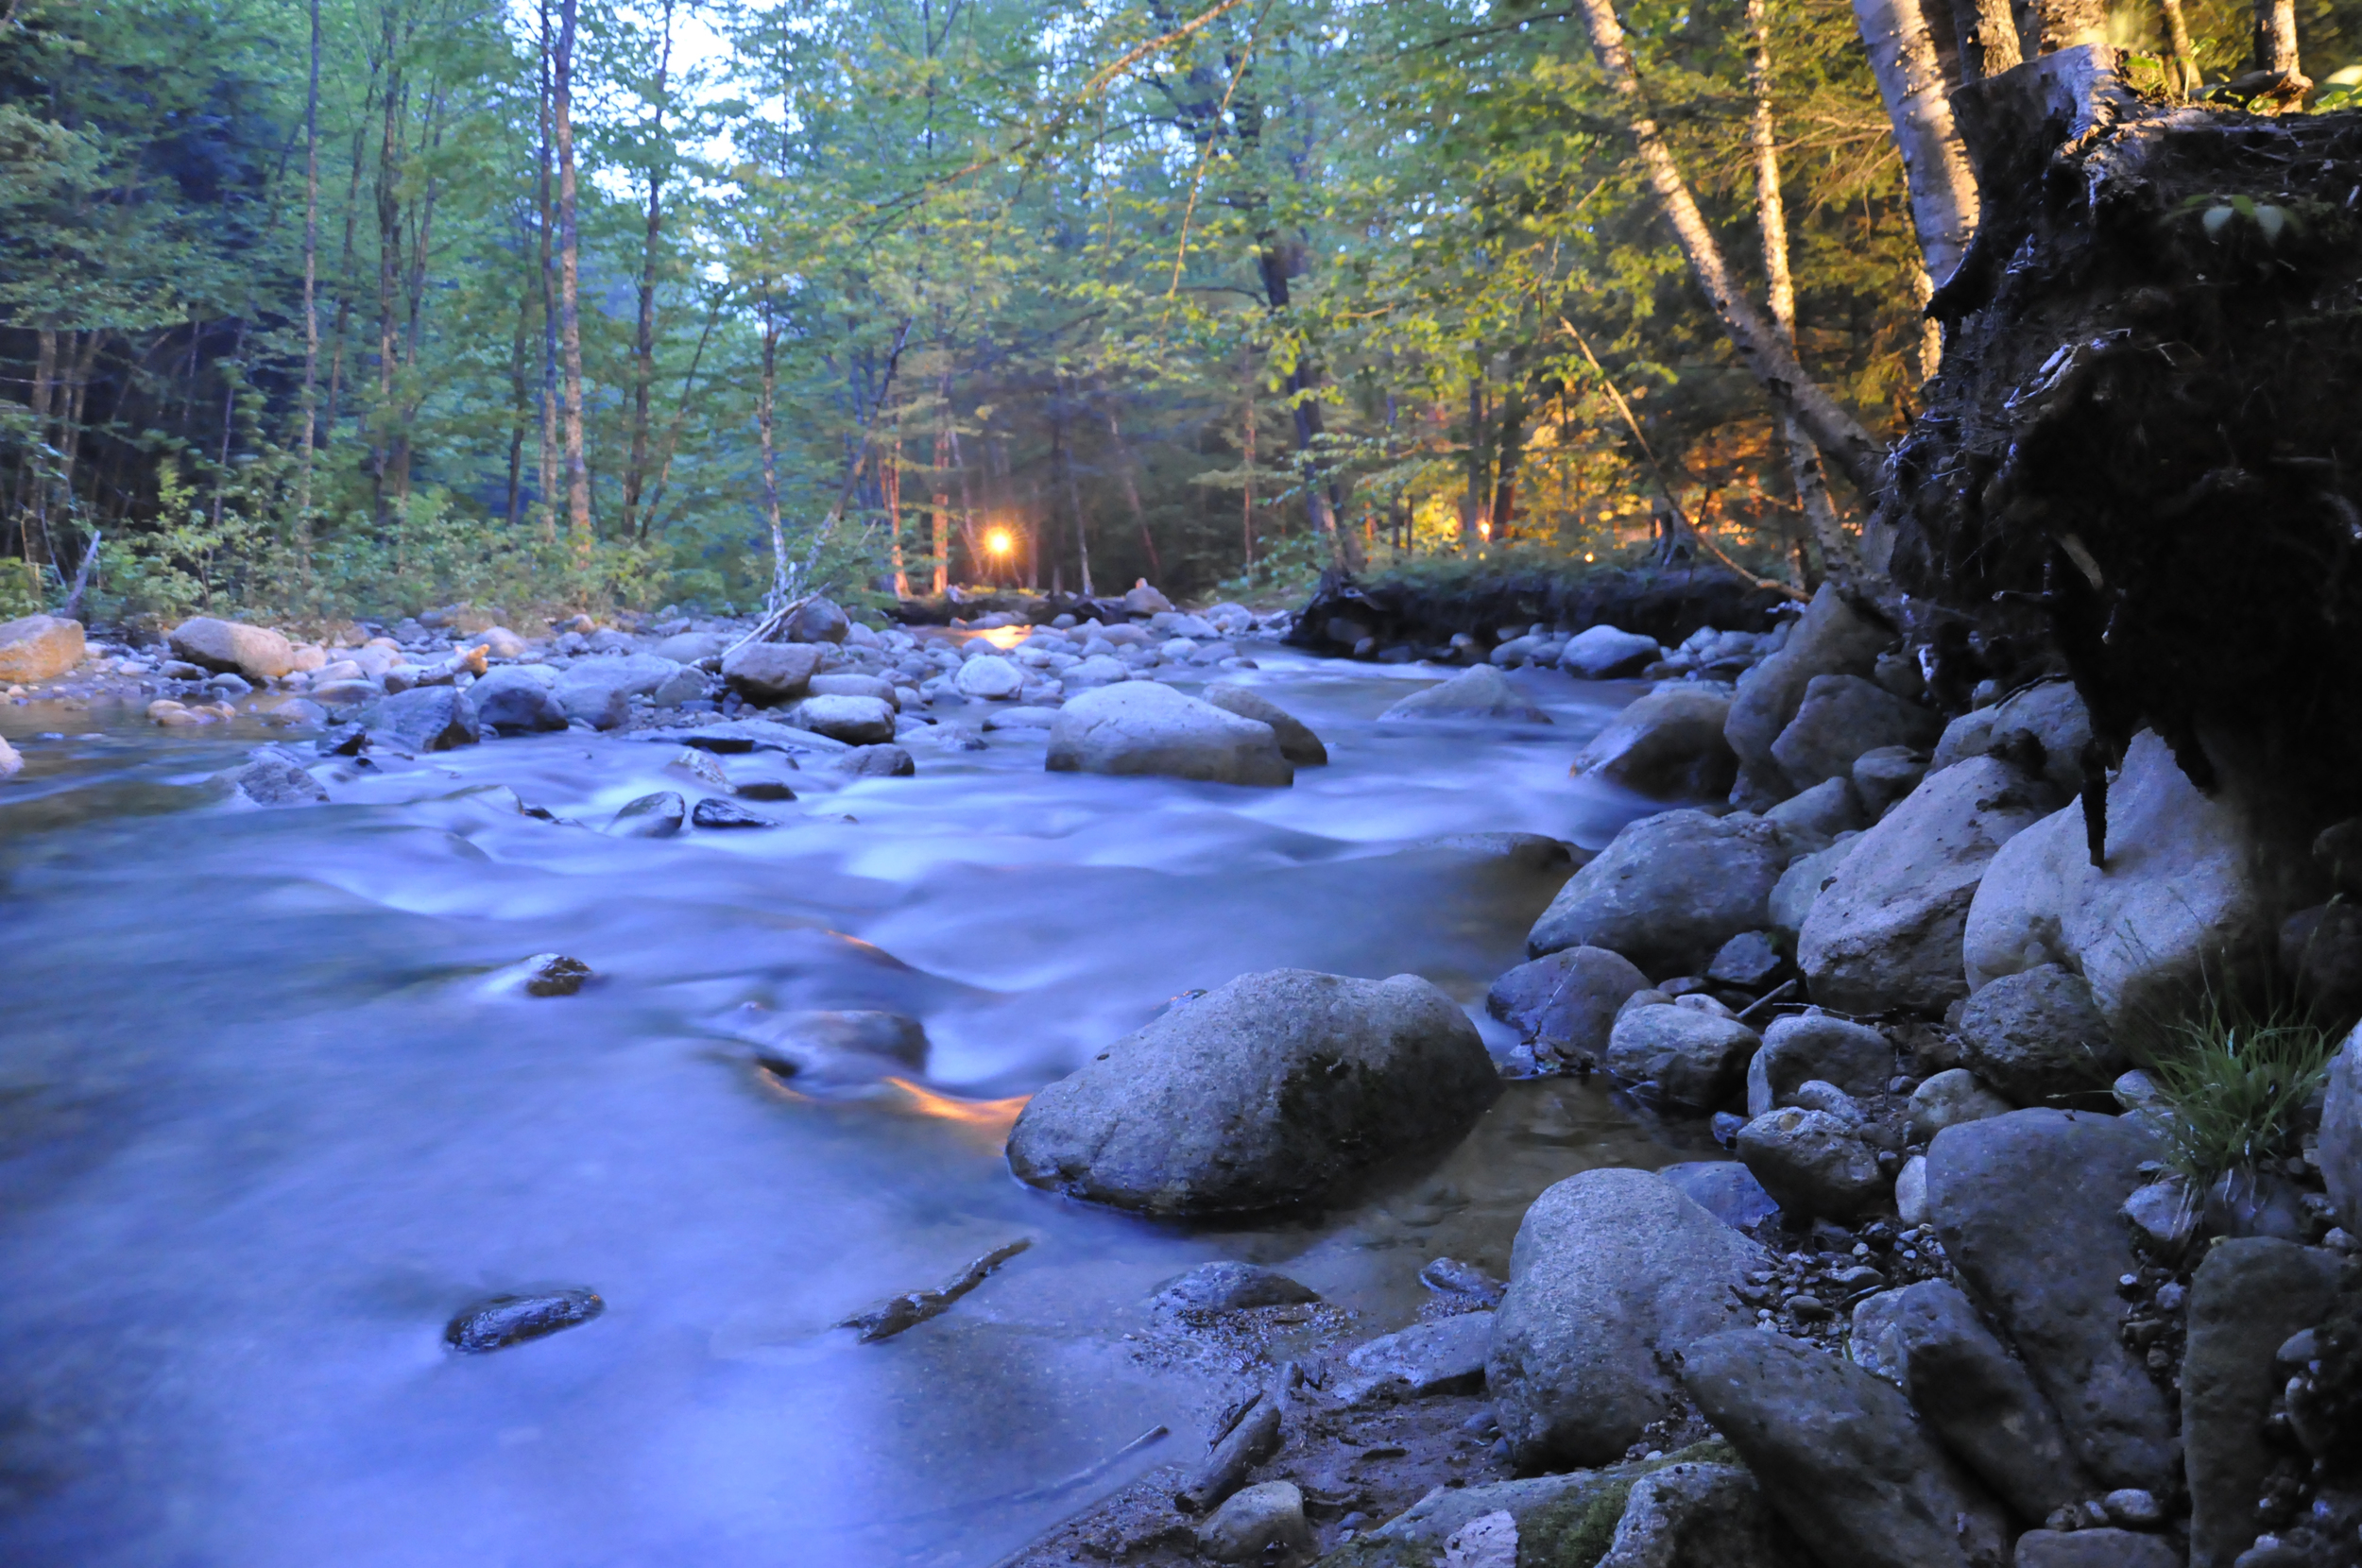 Long exposure on Tripoli Rd in Lincoln, NH